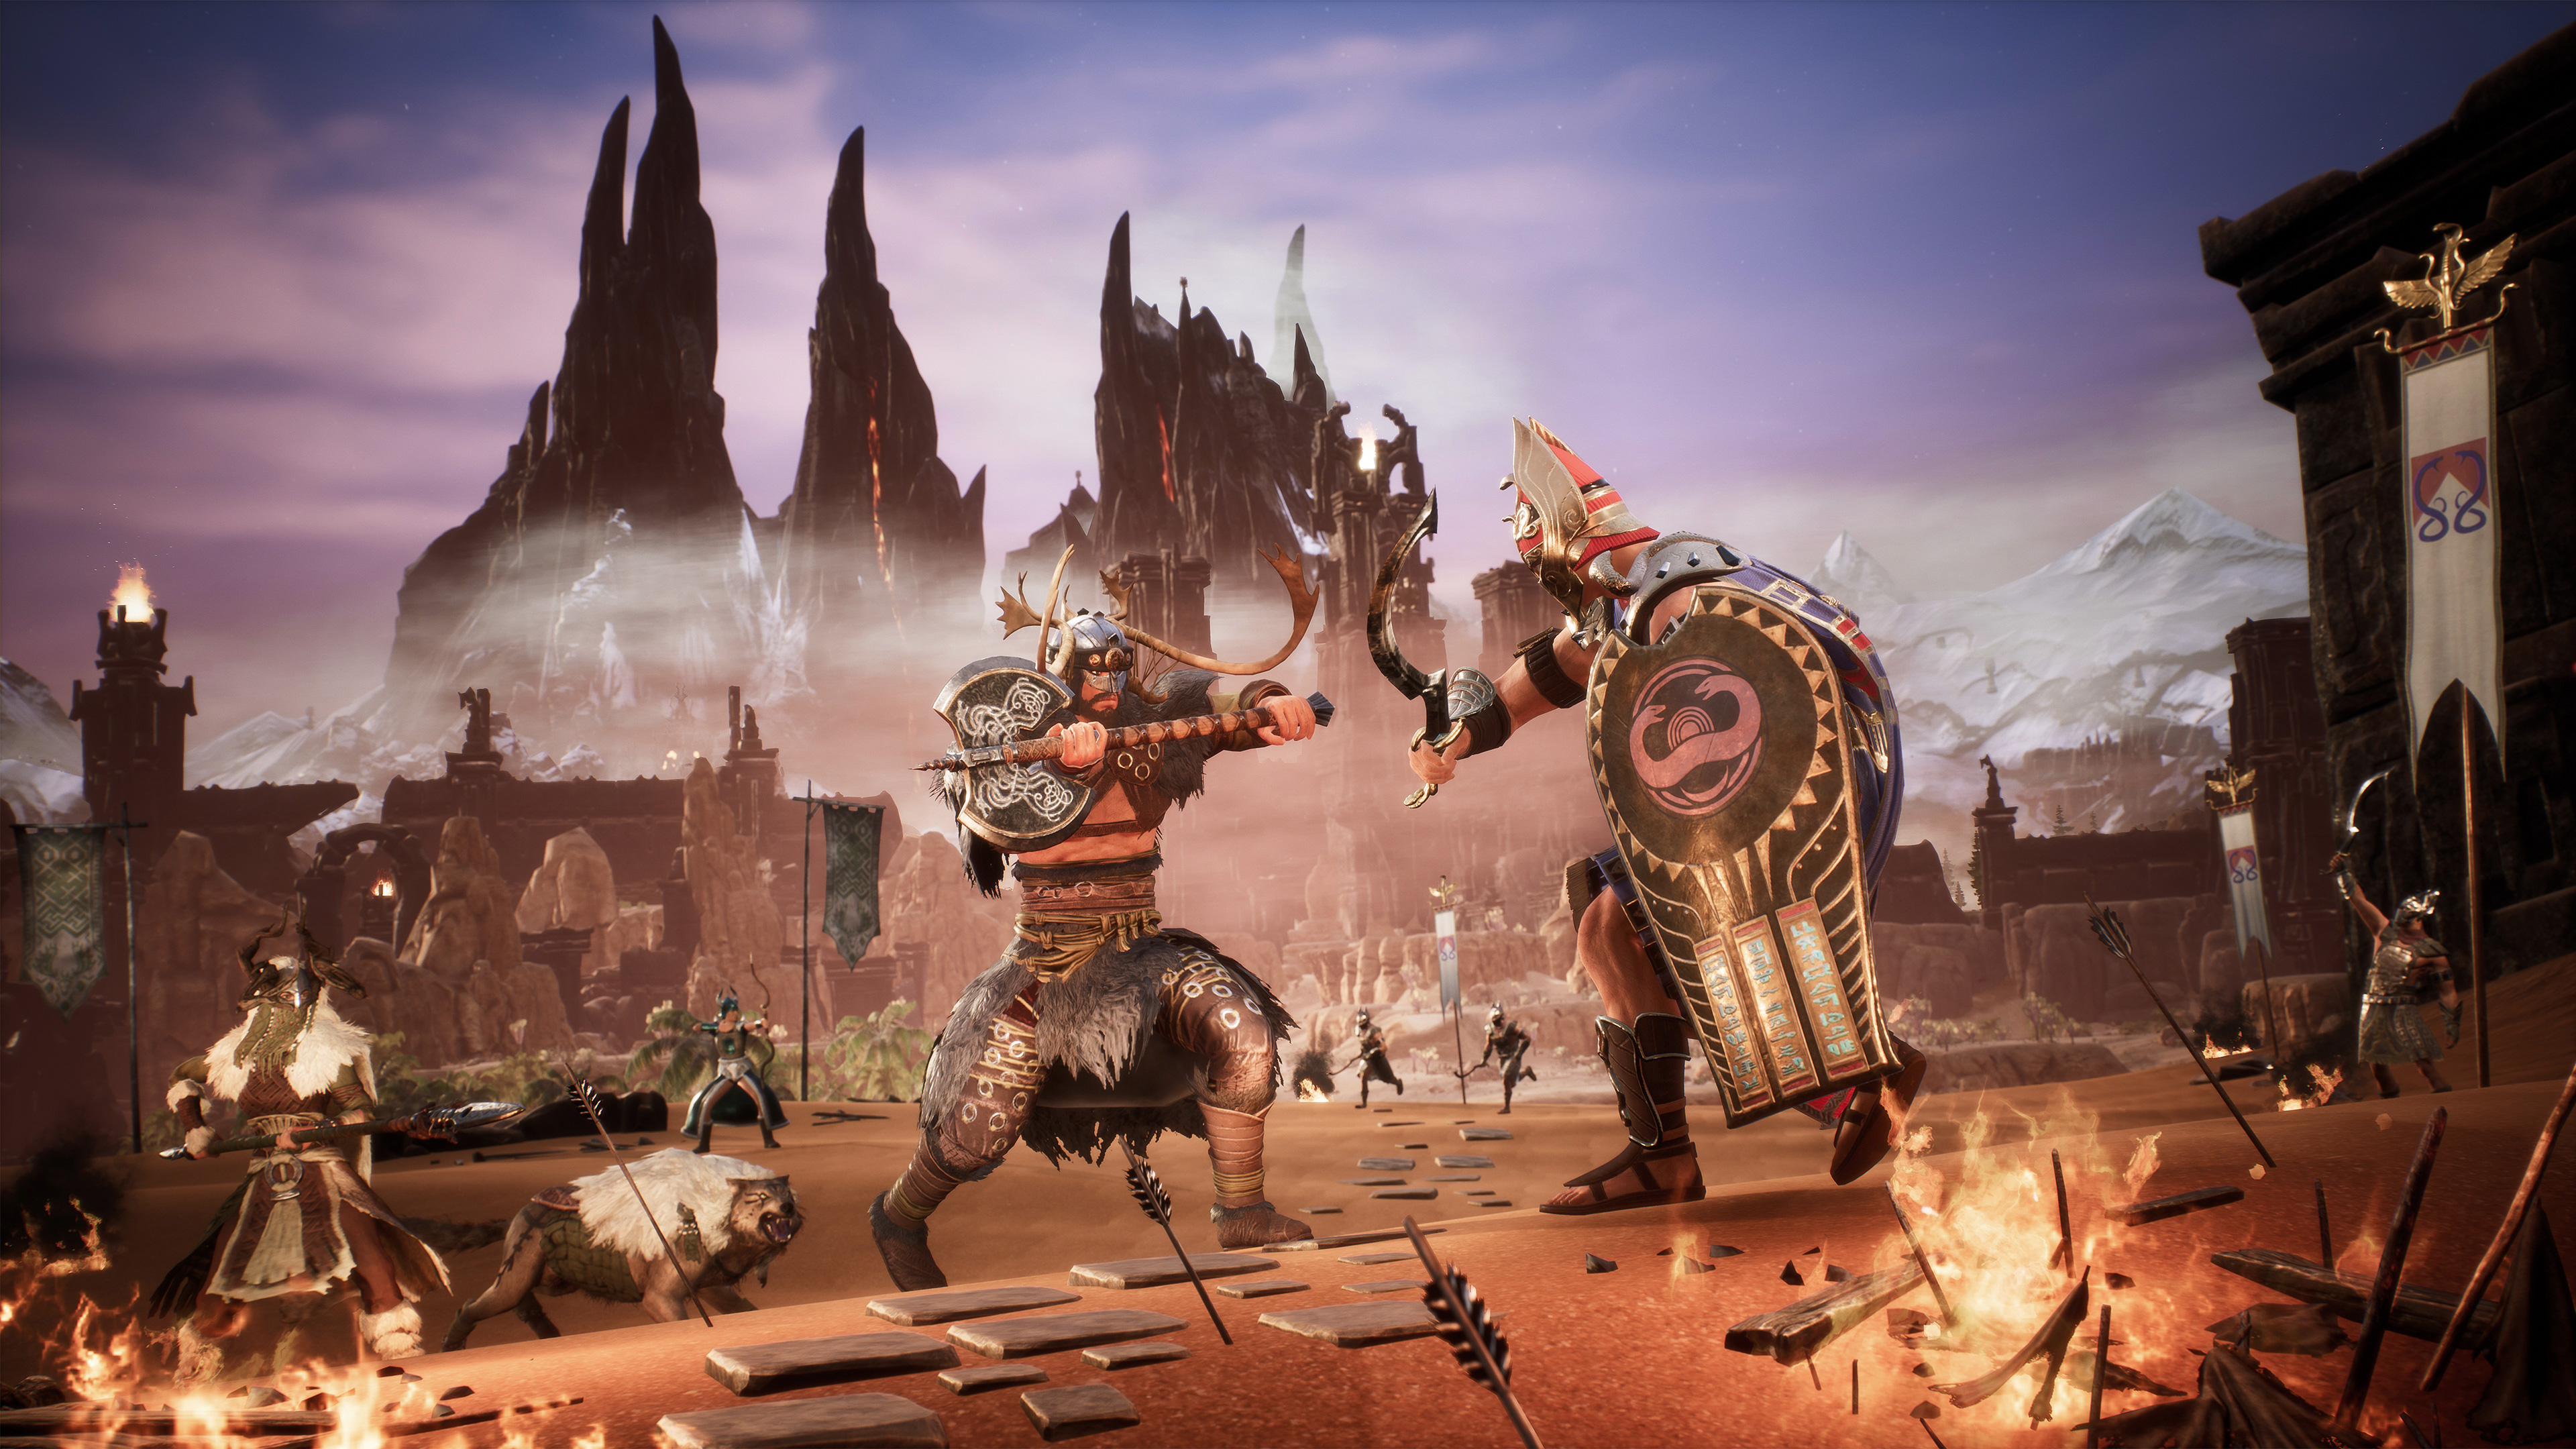 conan-exiles-blood-and-sand.jpg